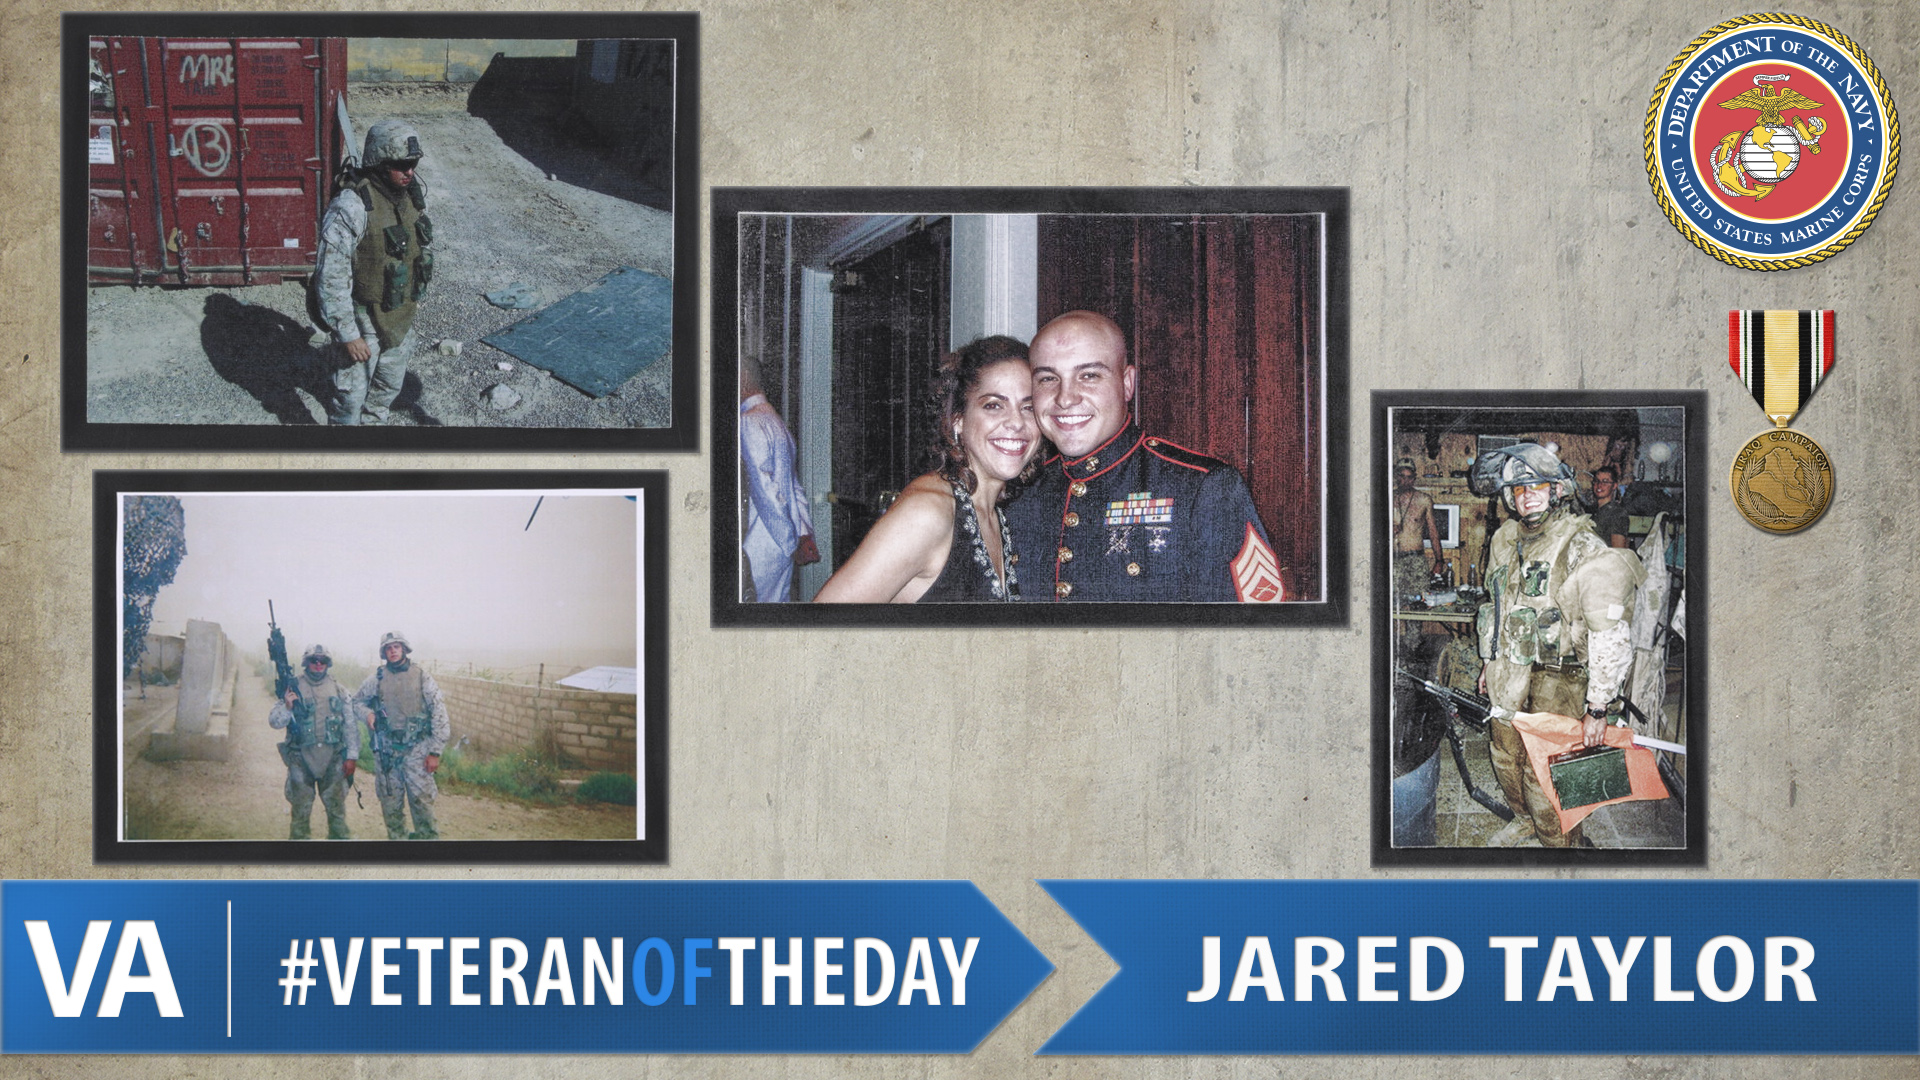 Jared Taylor - Veteran of the Day